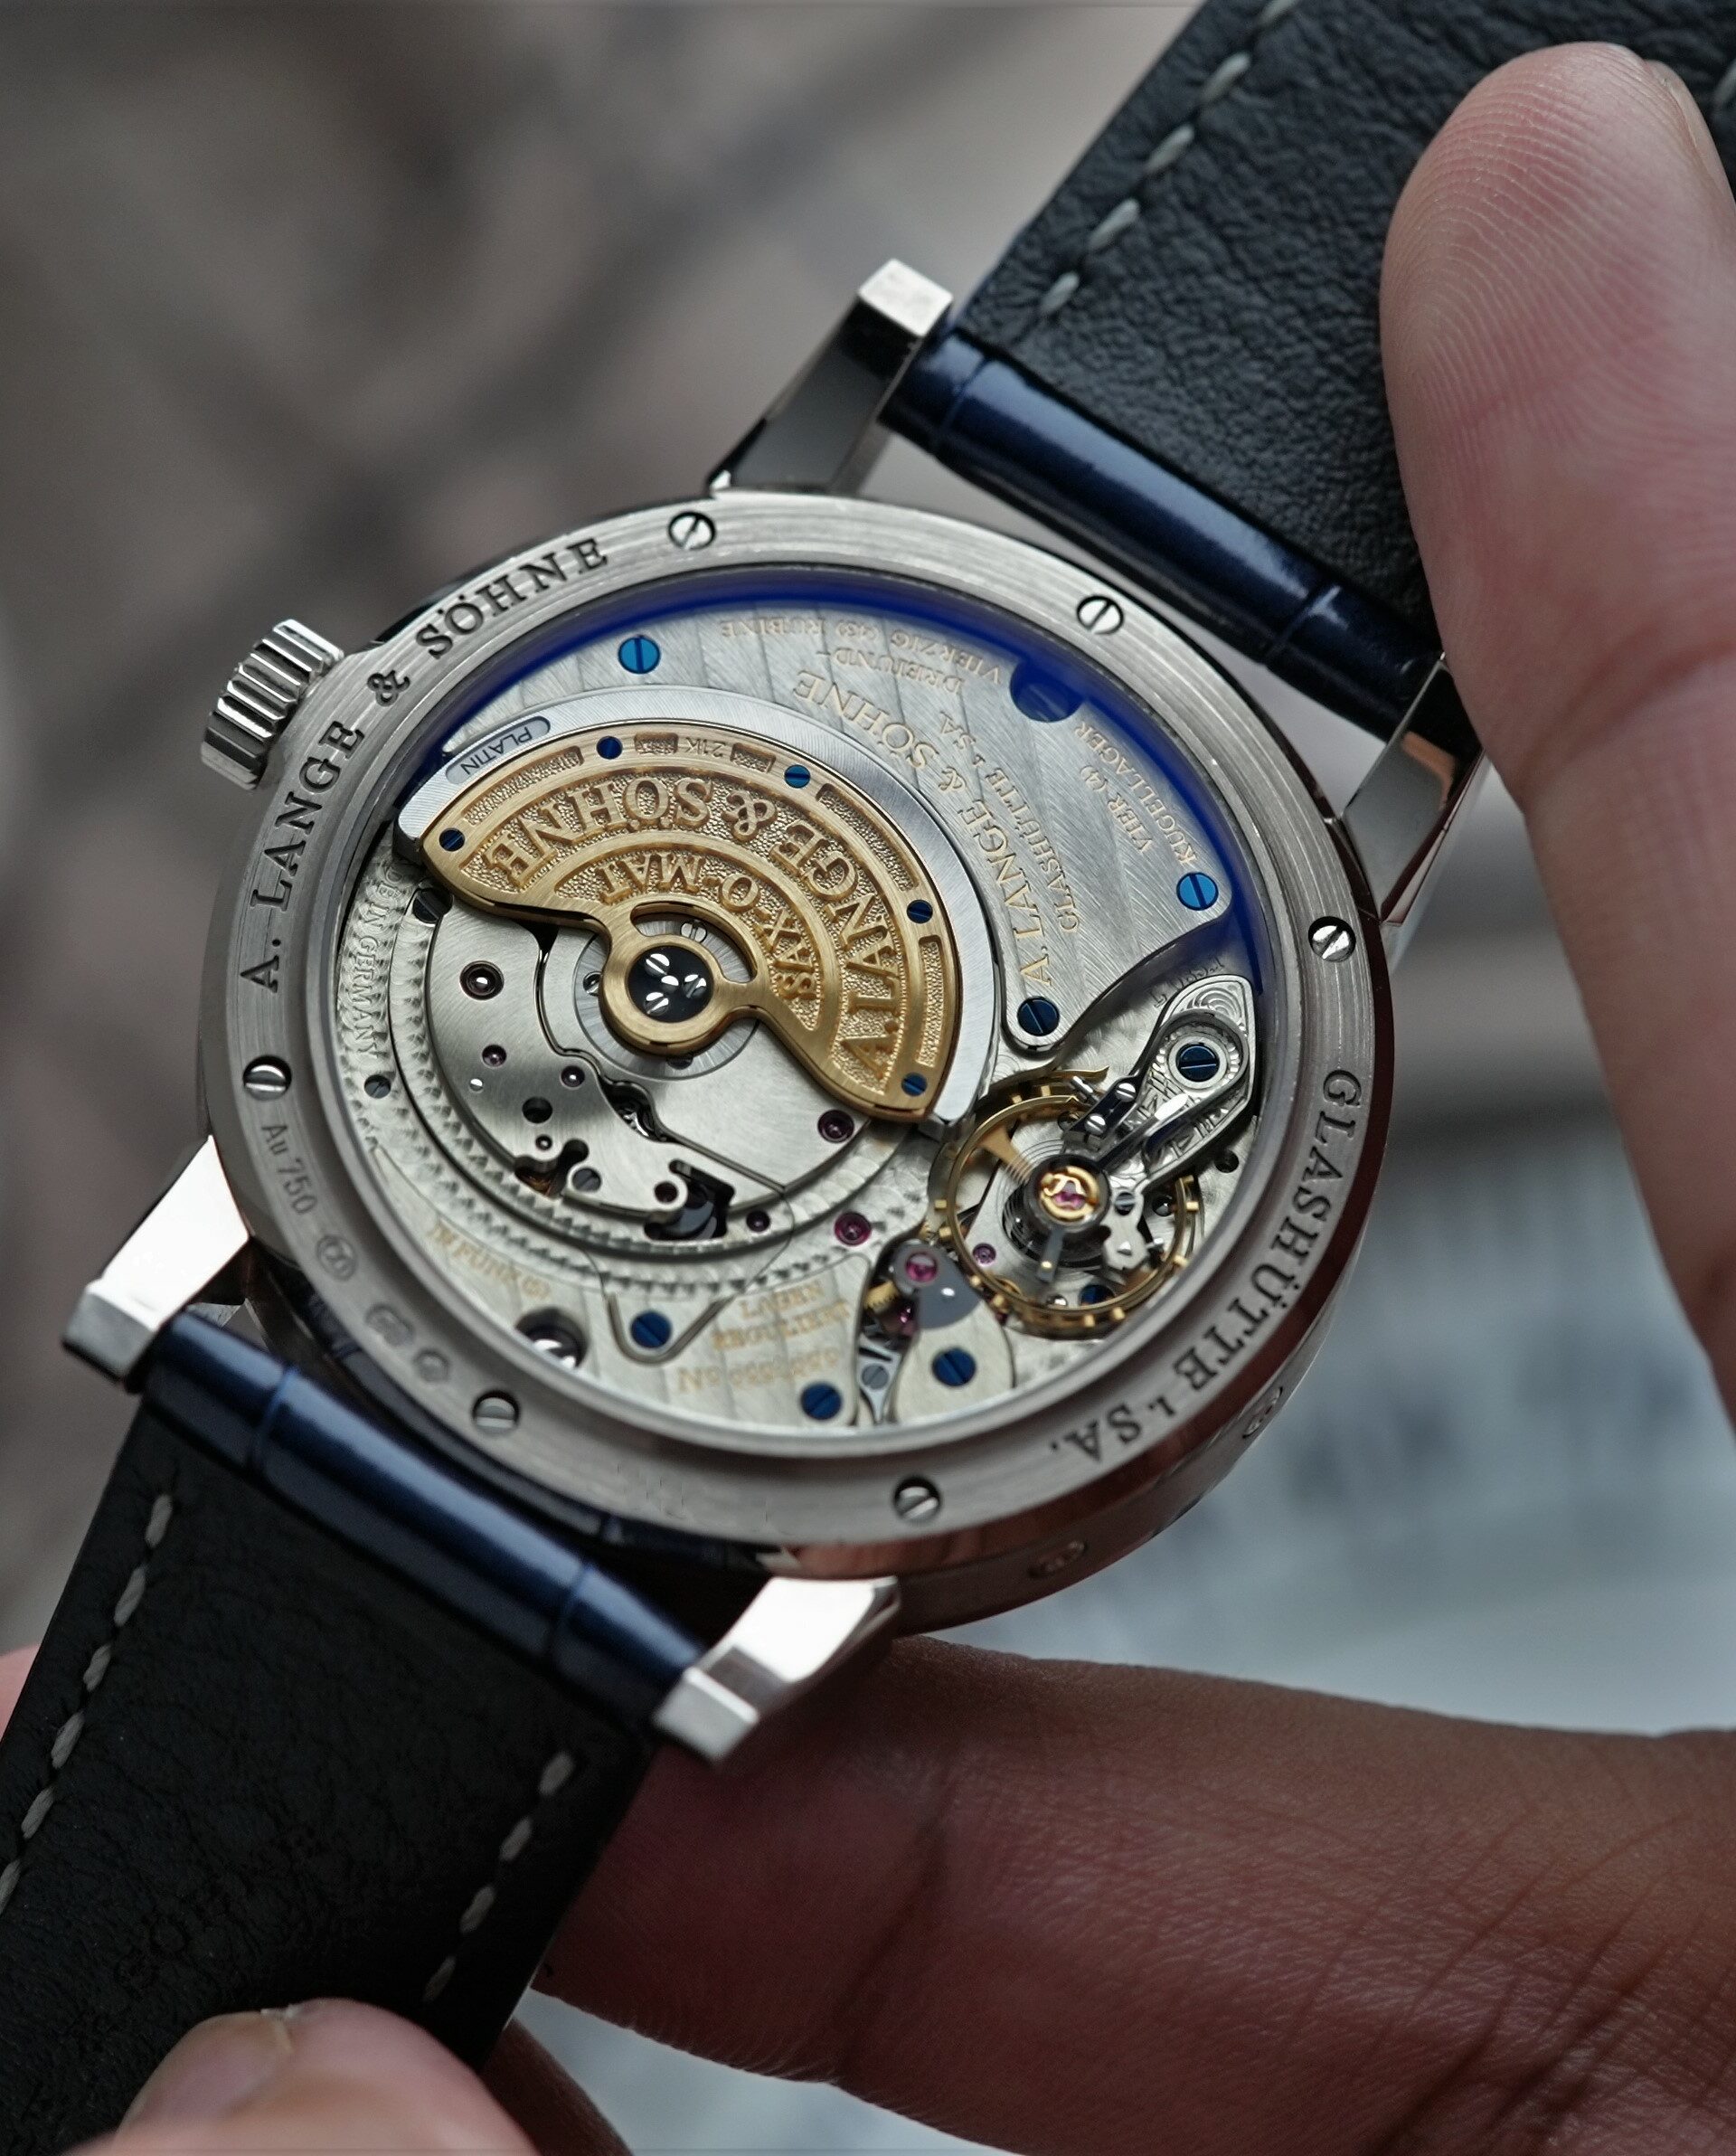 Exhibition caseback on the A. Lange & Söhne Saxonia Annual Calendar watch.